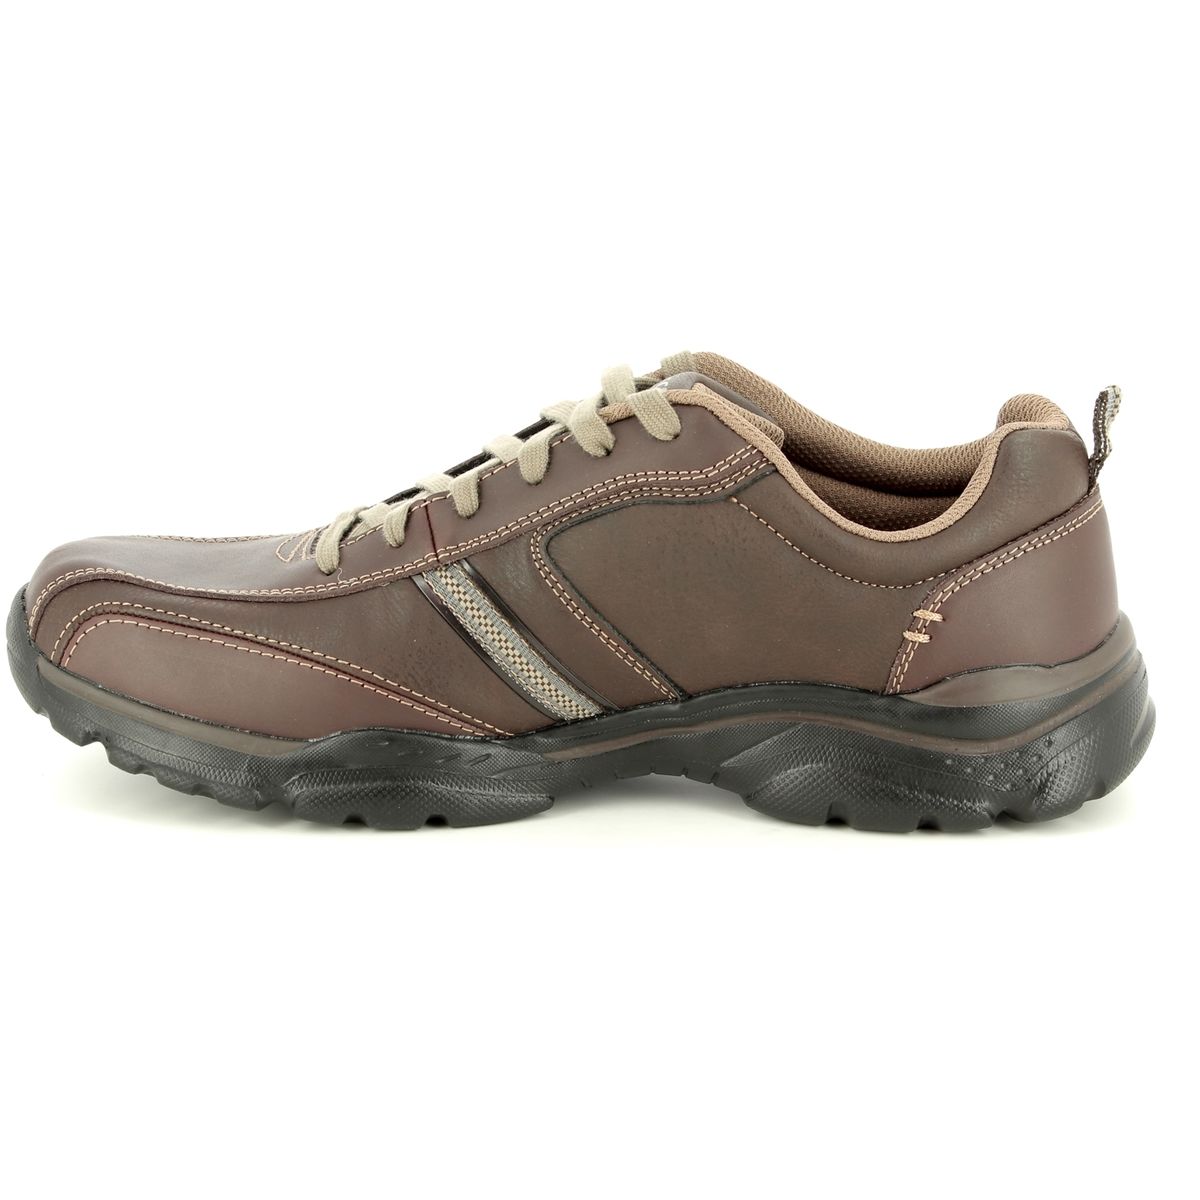 Skechers Rovato Larion 65419 BRN Brown casual shoes